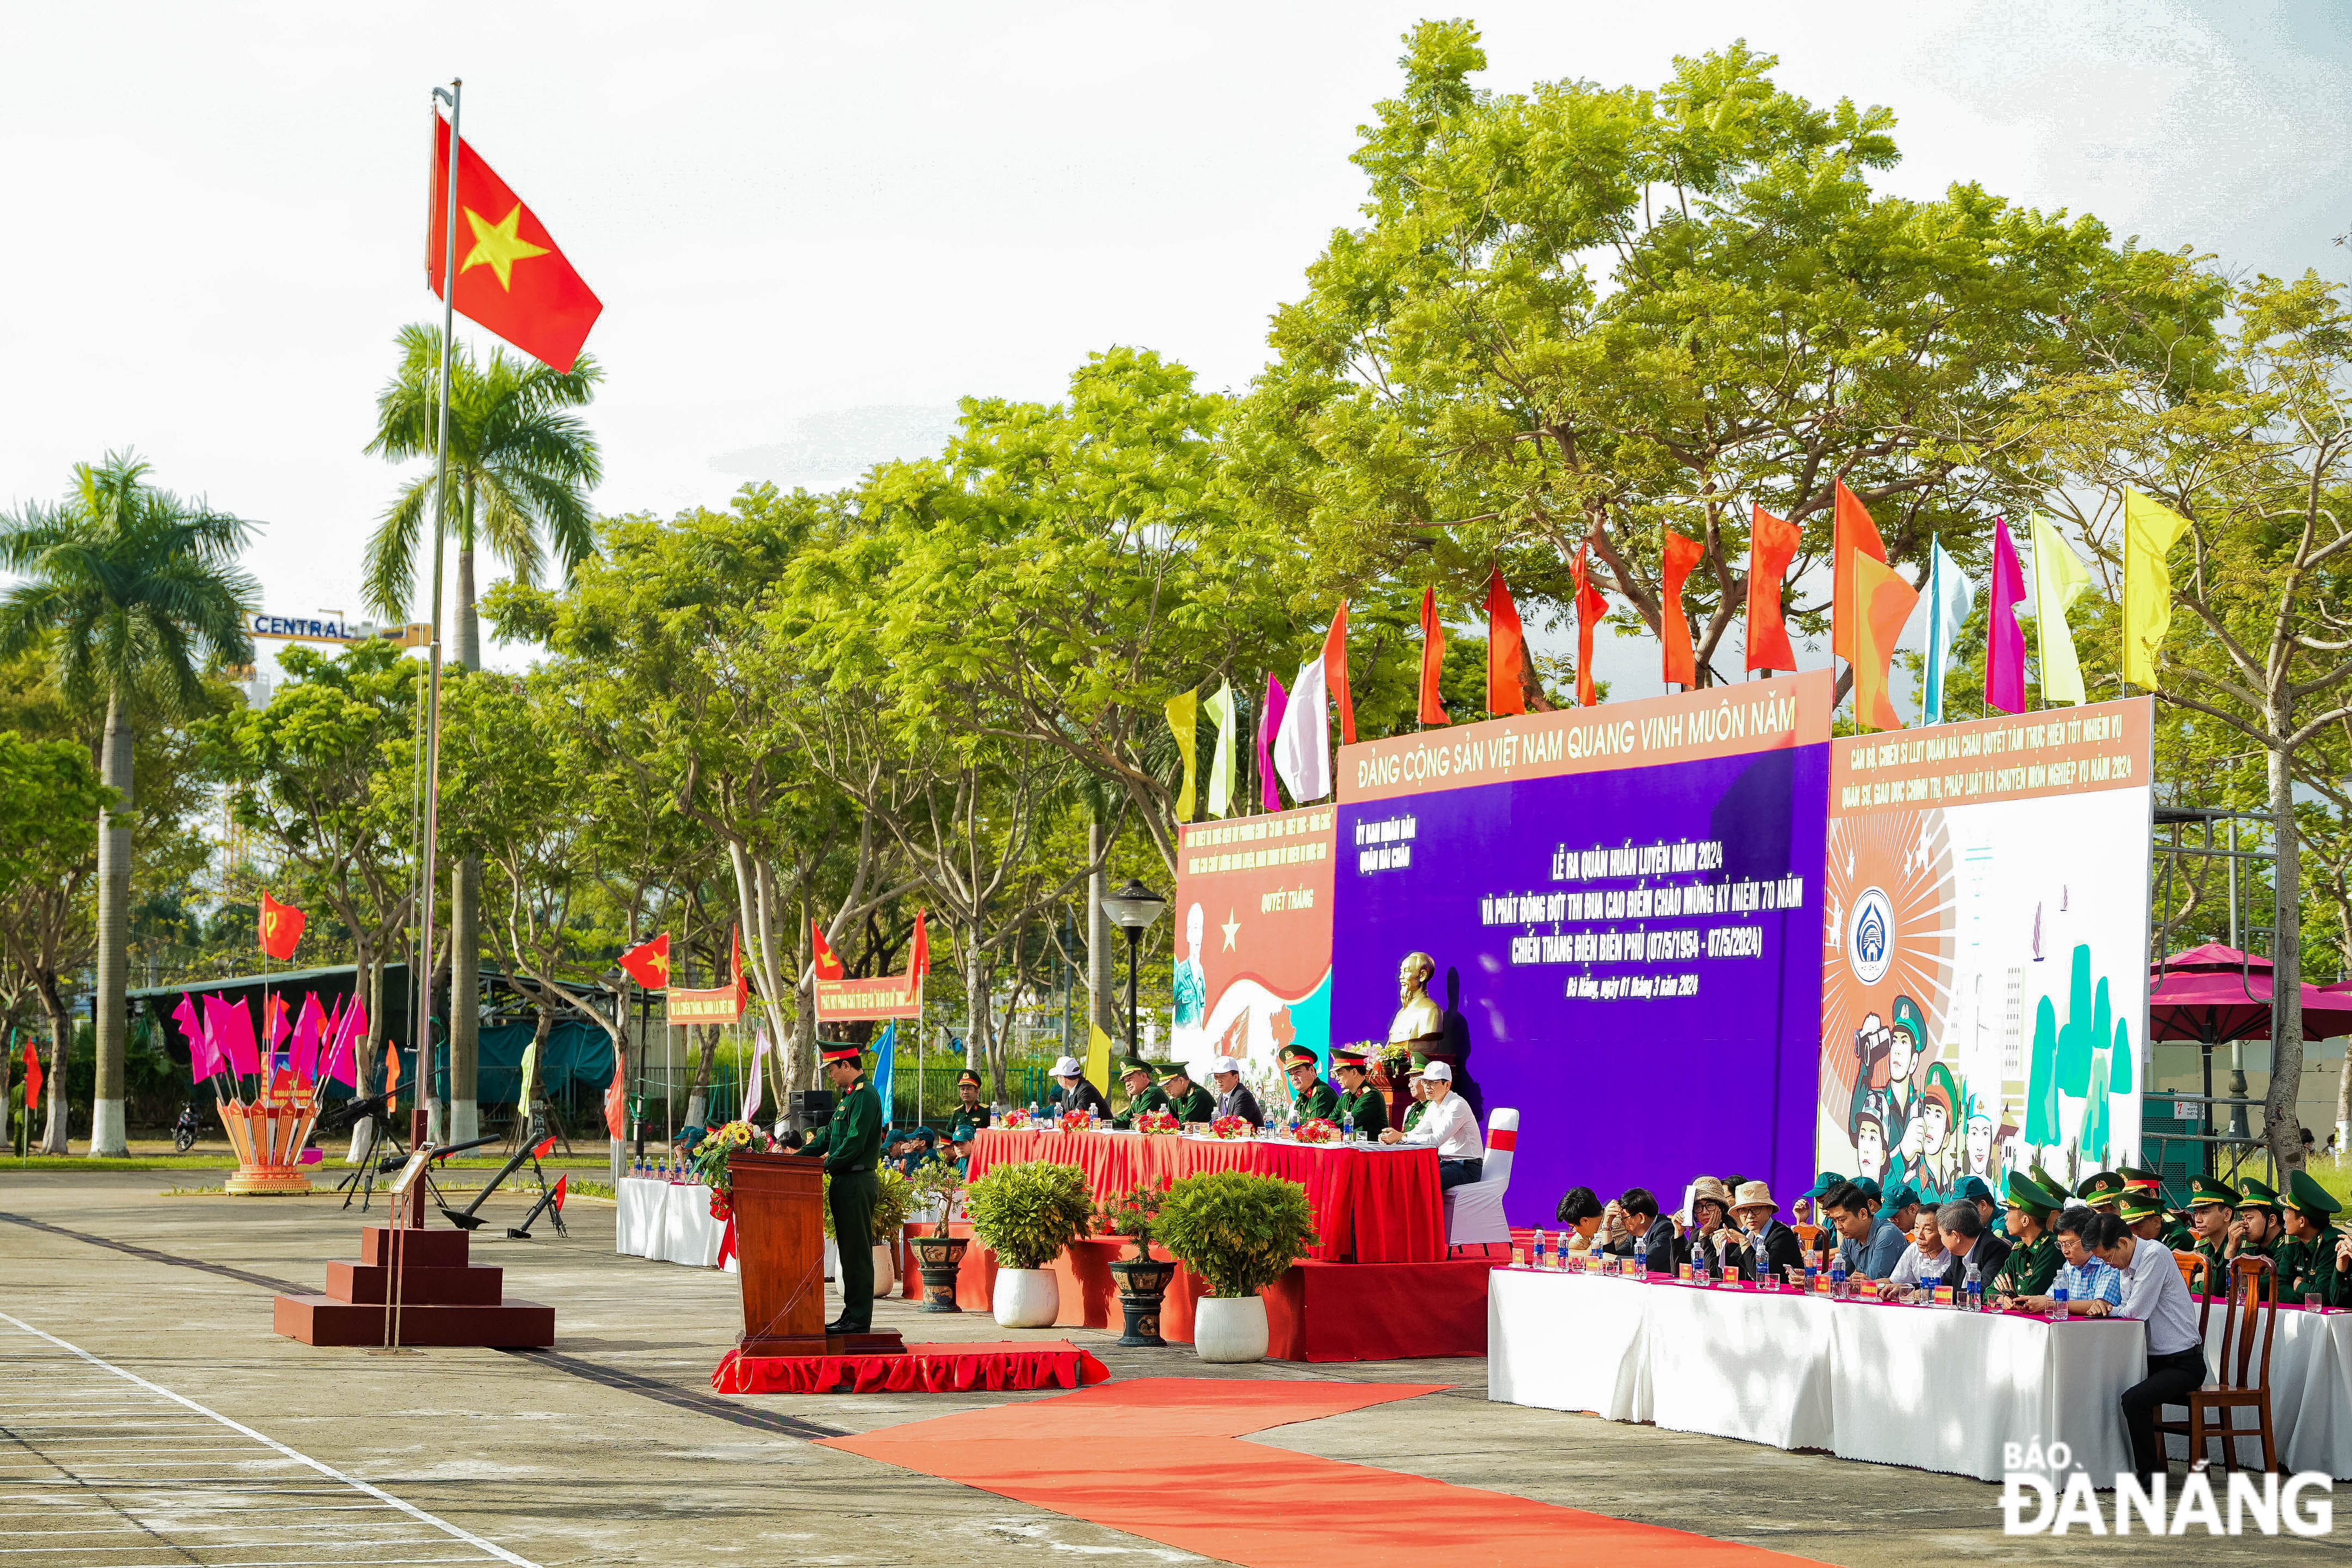 On March 1, at the Tien Son Sports Arena, authorities in Hai Chau District have organised the army training course in 2024 and launched peak emulation to celebrate the 70th anniversary of the Dien Bien Phu Victory.